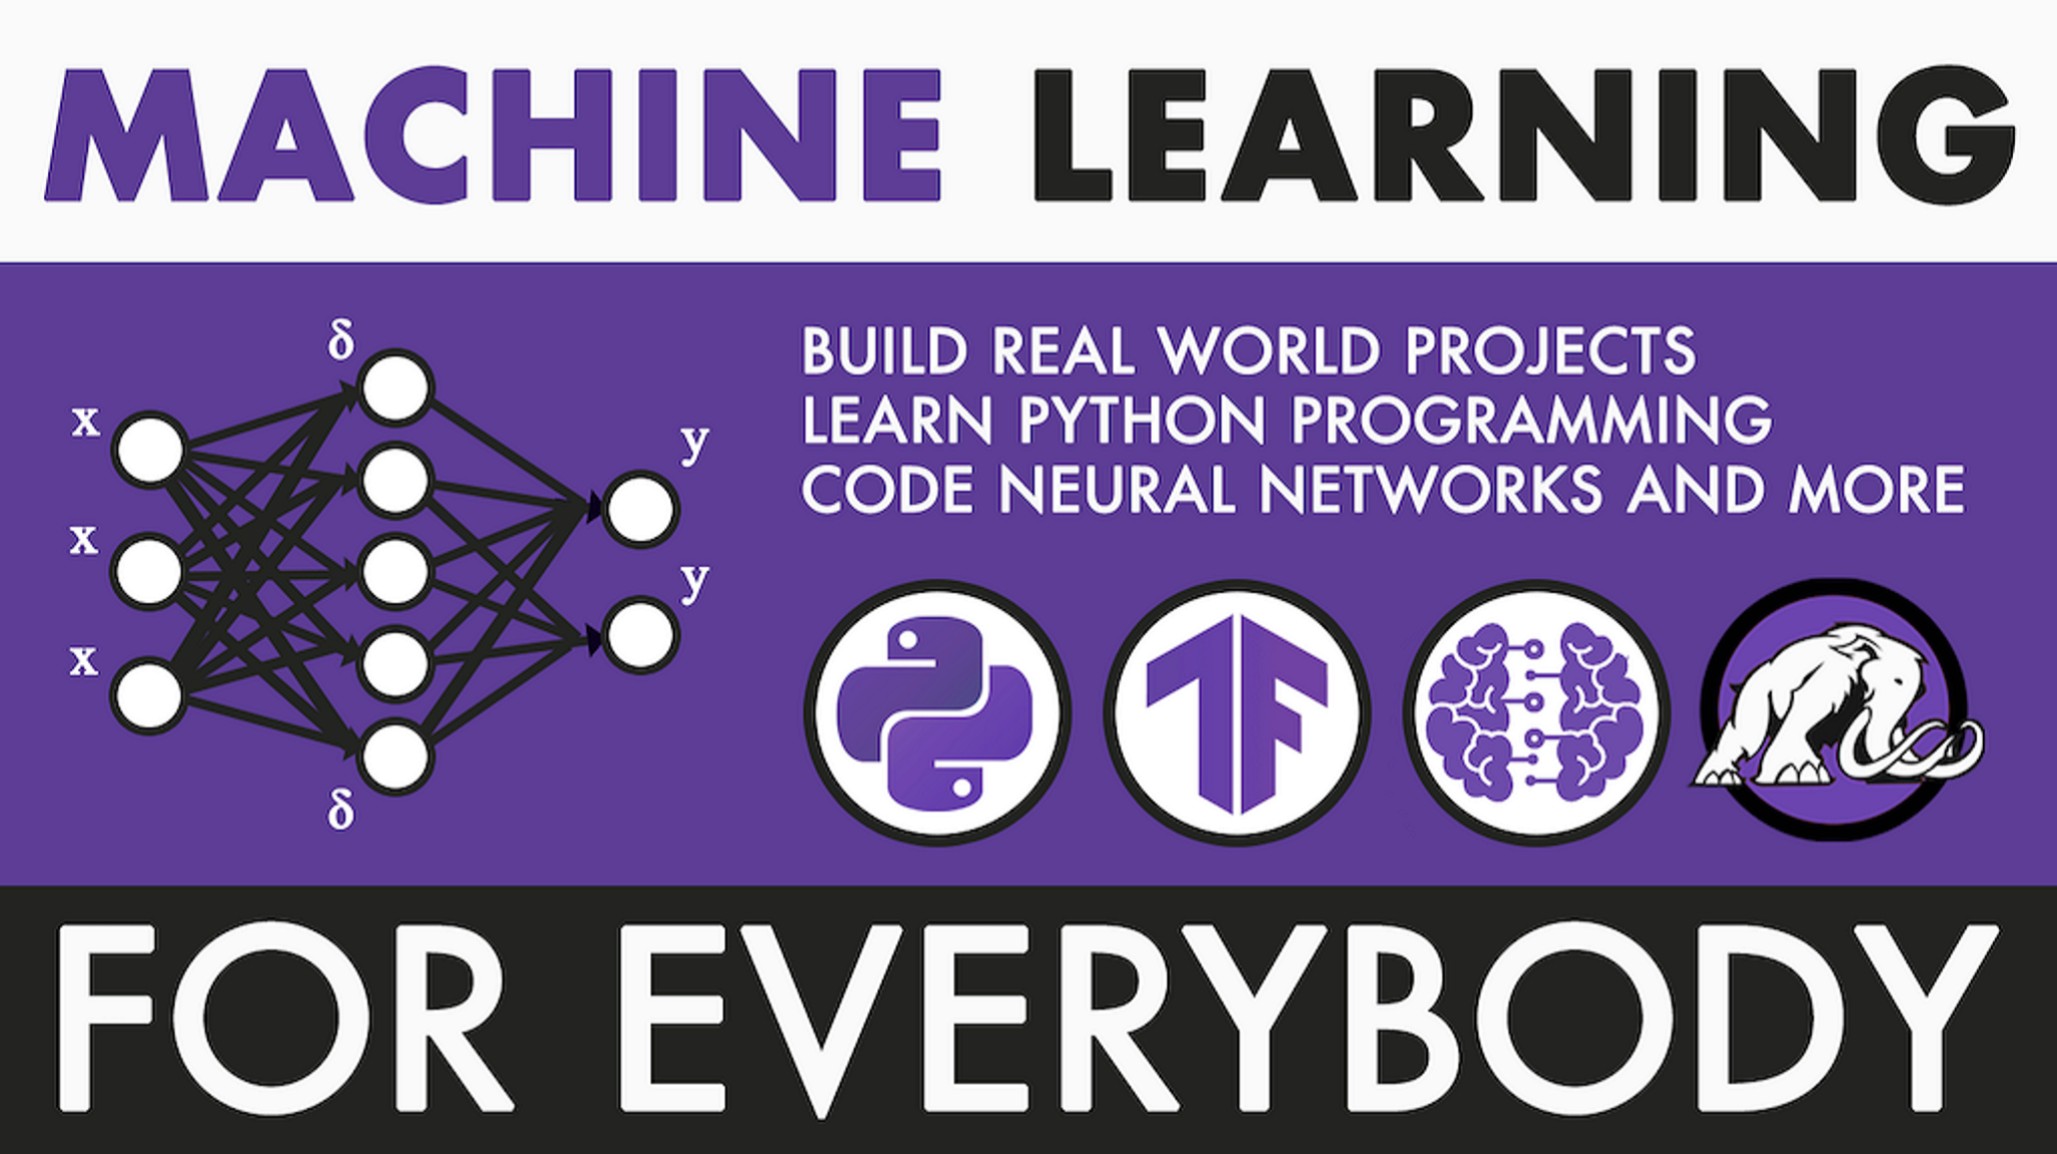 Practical Machine Learning Bootcamp with Real World Industry Projects